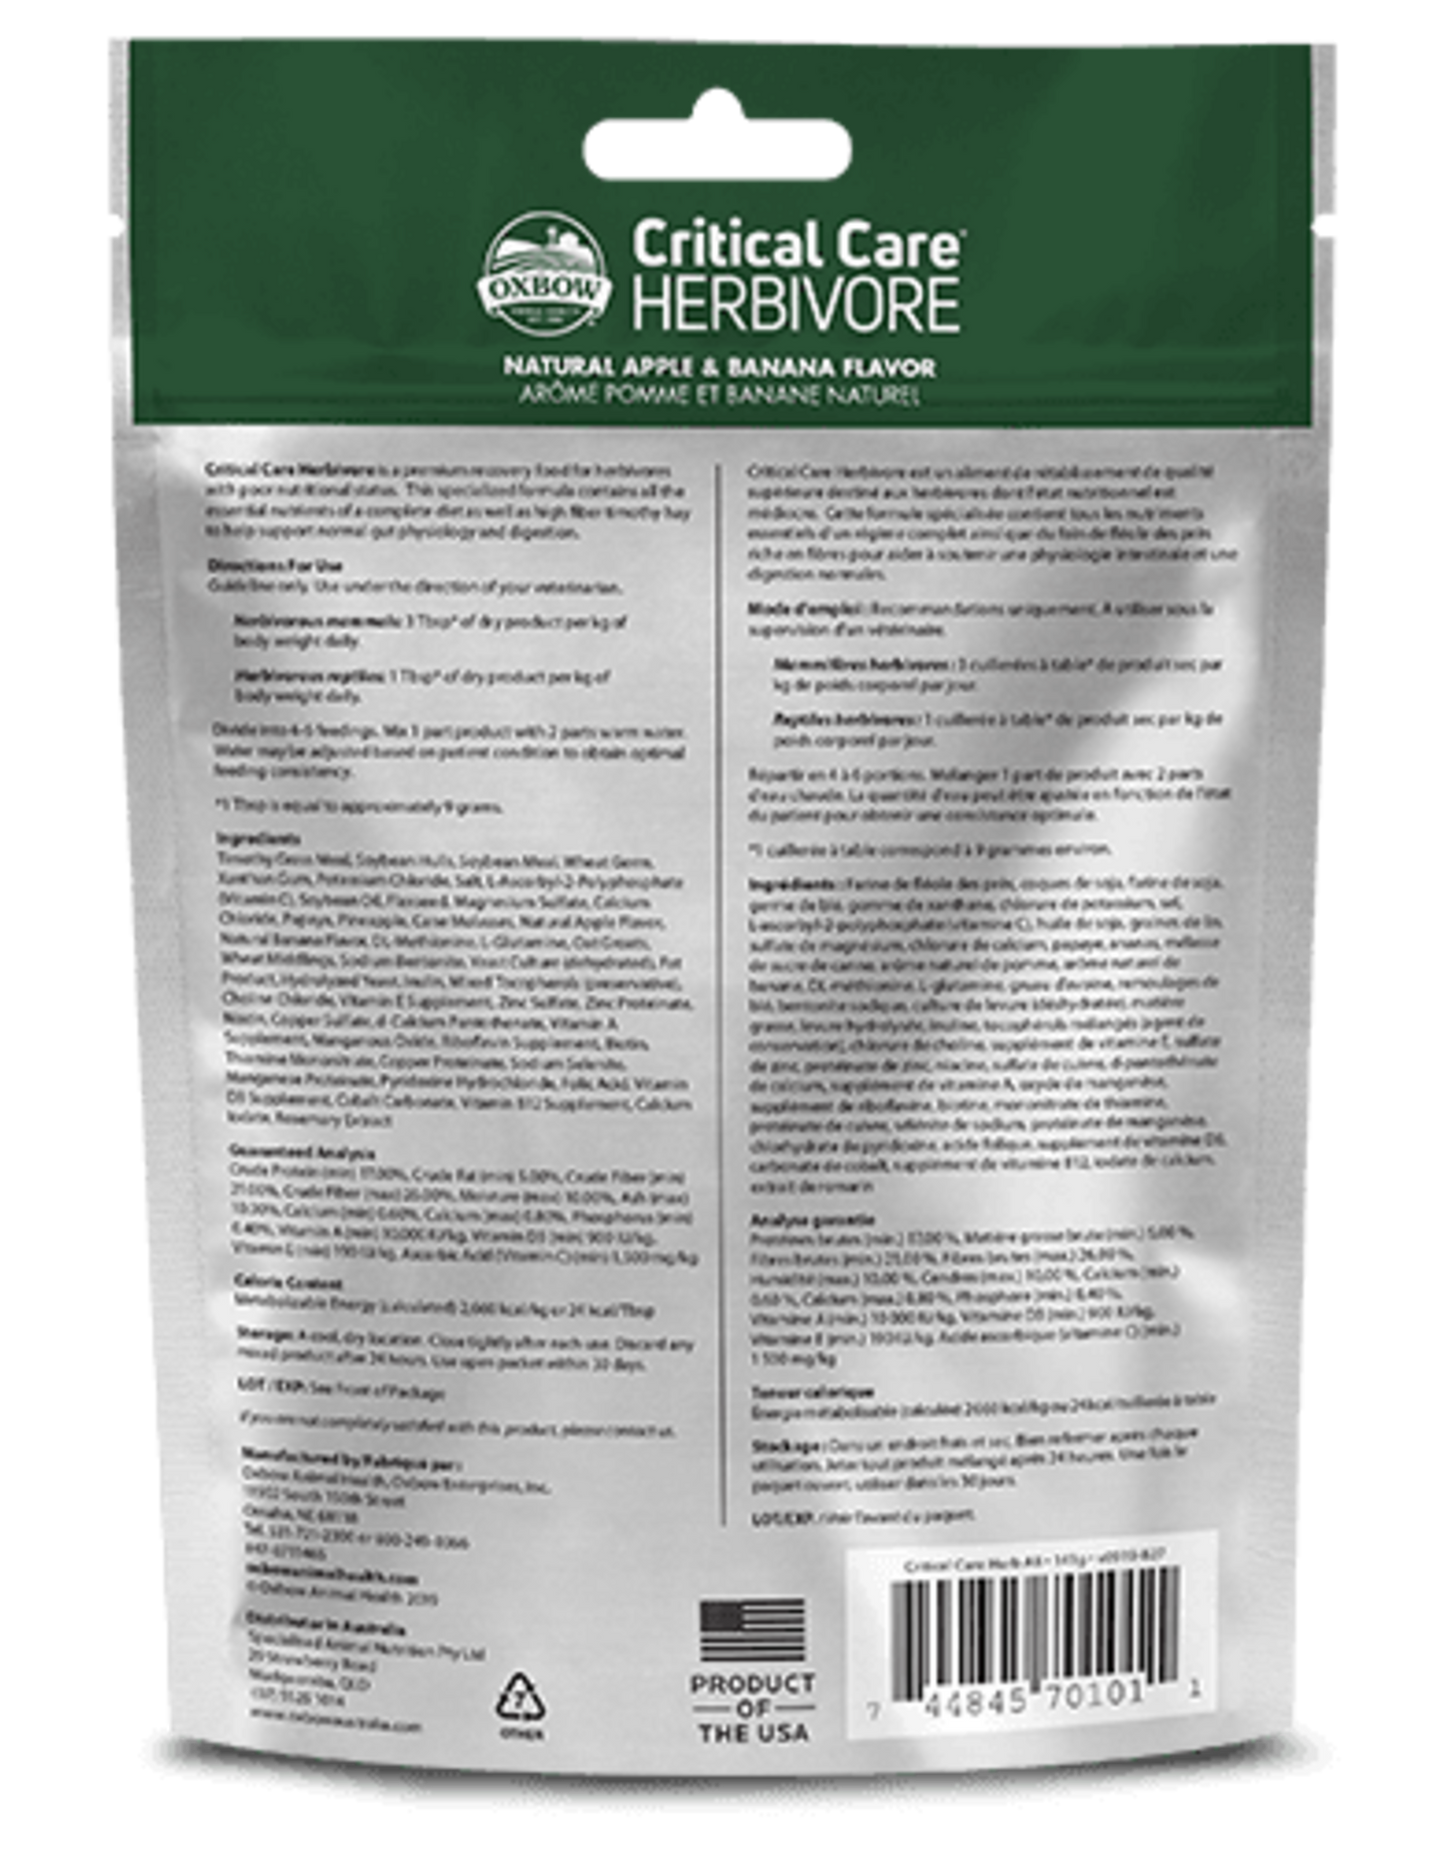 Oxbow Critical Care Herbivore 1 lb Apple and Banana